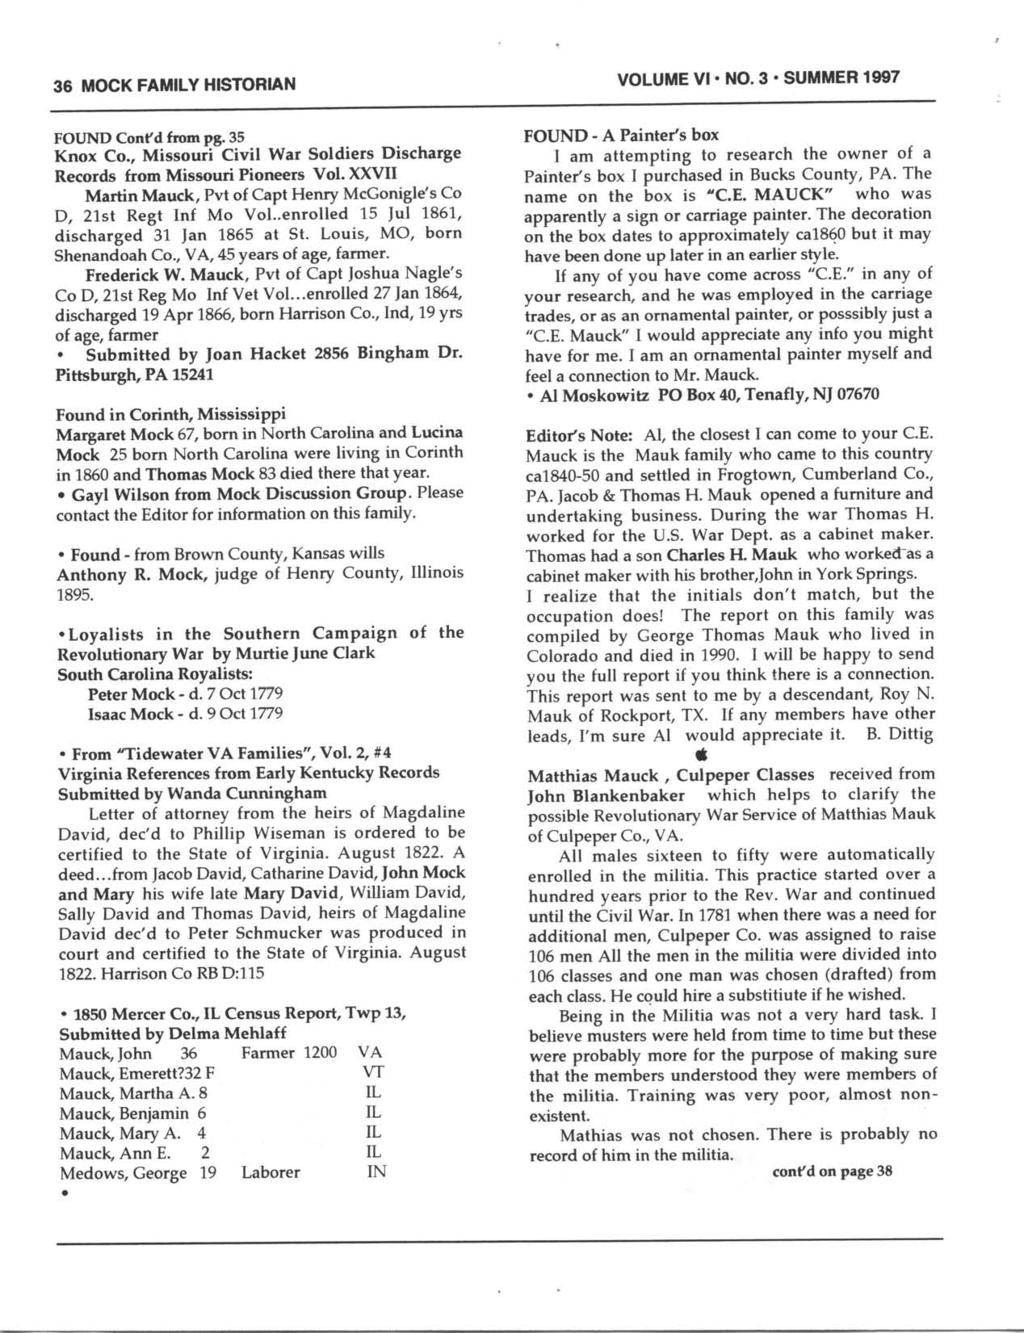 36 MOCK FAMILY HISTORIAN VOLUME VI. NO.3. SUMMER 1997 FOUND Confd from pg.35 Knox Co., Missouii Civil Wr Soldiers Dischrge Records from Missouri Pioneers Vol.